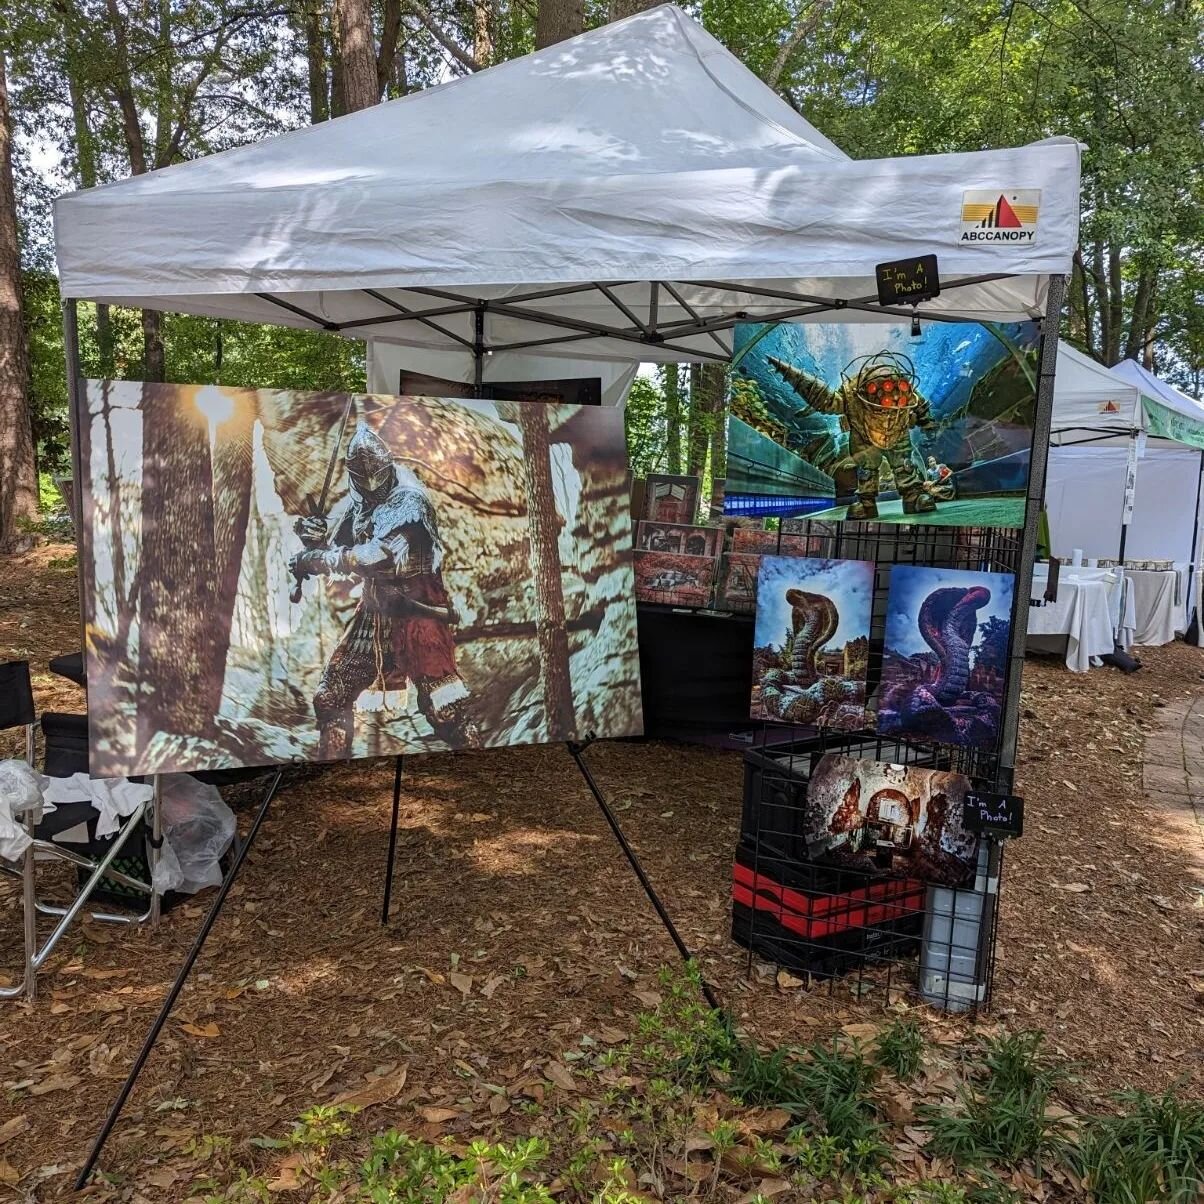 We are ready to rock for the Roswell Springs Arts Festival!

If you happen to come be sure to check out our huge lovely canvas of @sunlightofastora on display from our wonderful adventure at Horse Pens 40 a little over a year ago.

#cantongaphotograp